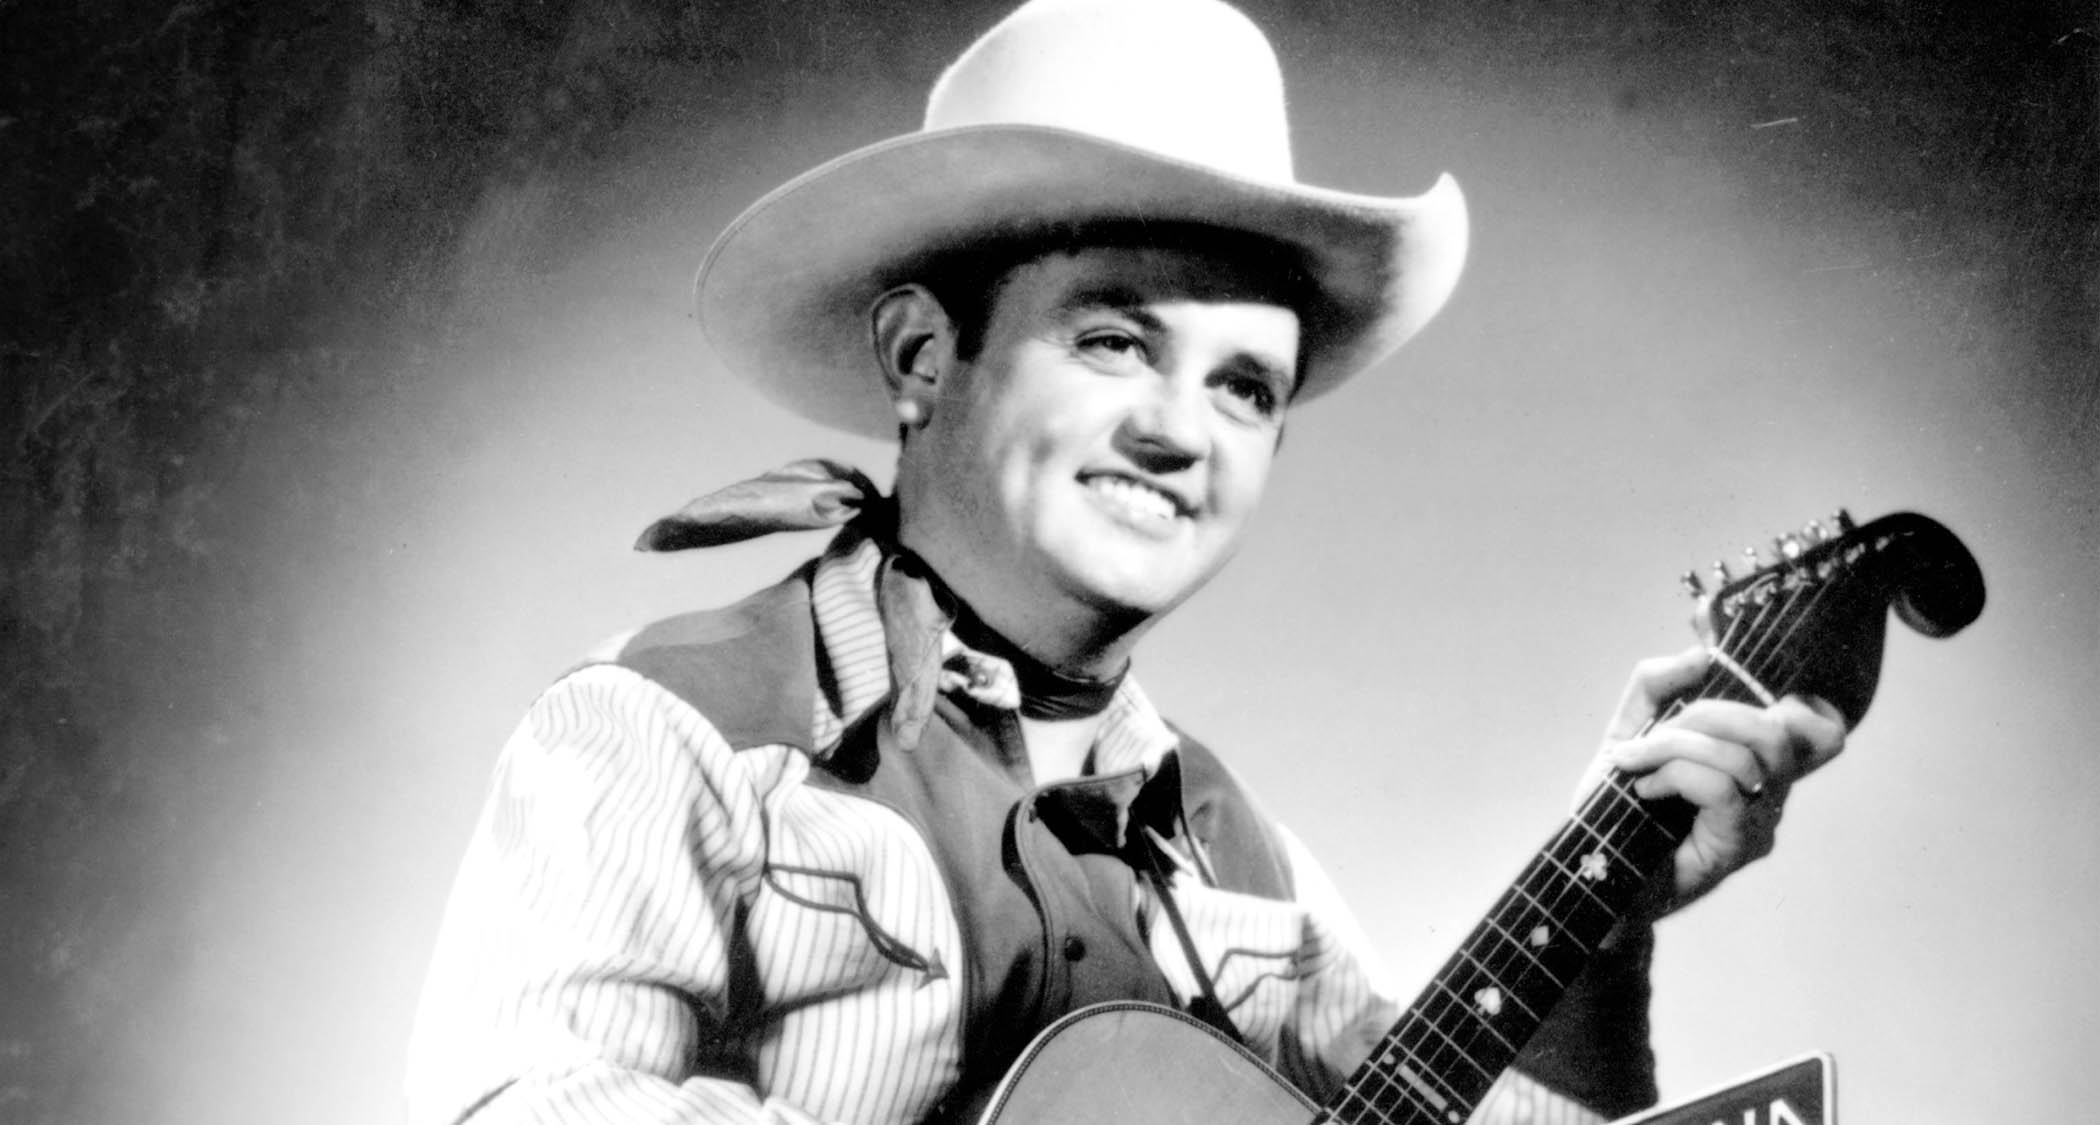 Merle Travis, Lester Flatt and Hank Williams pioneered the Americana guitar style – and laid the groundwork for today’s country and bluegrass guitar stars